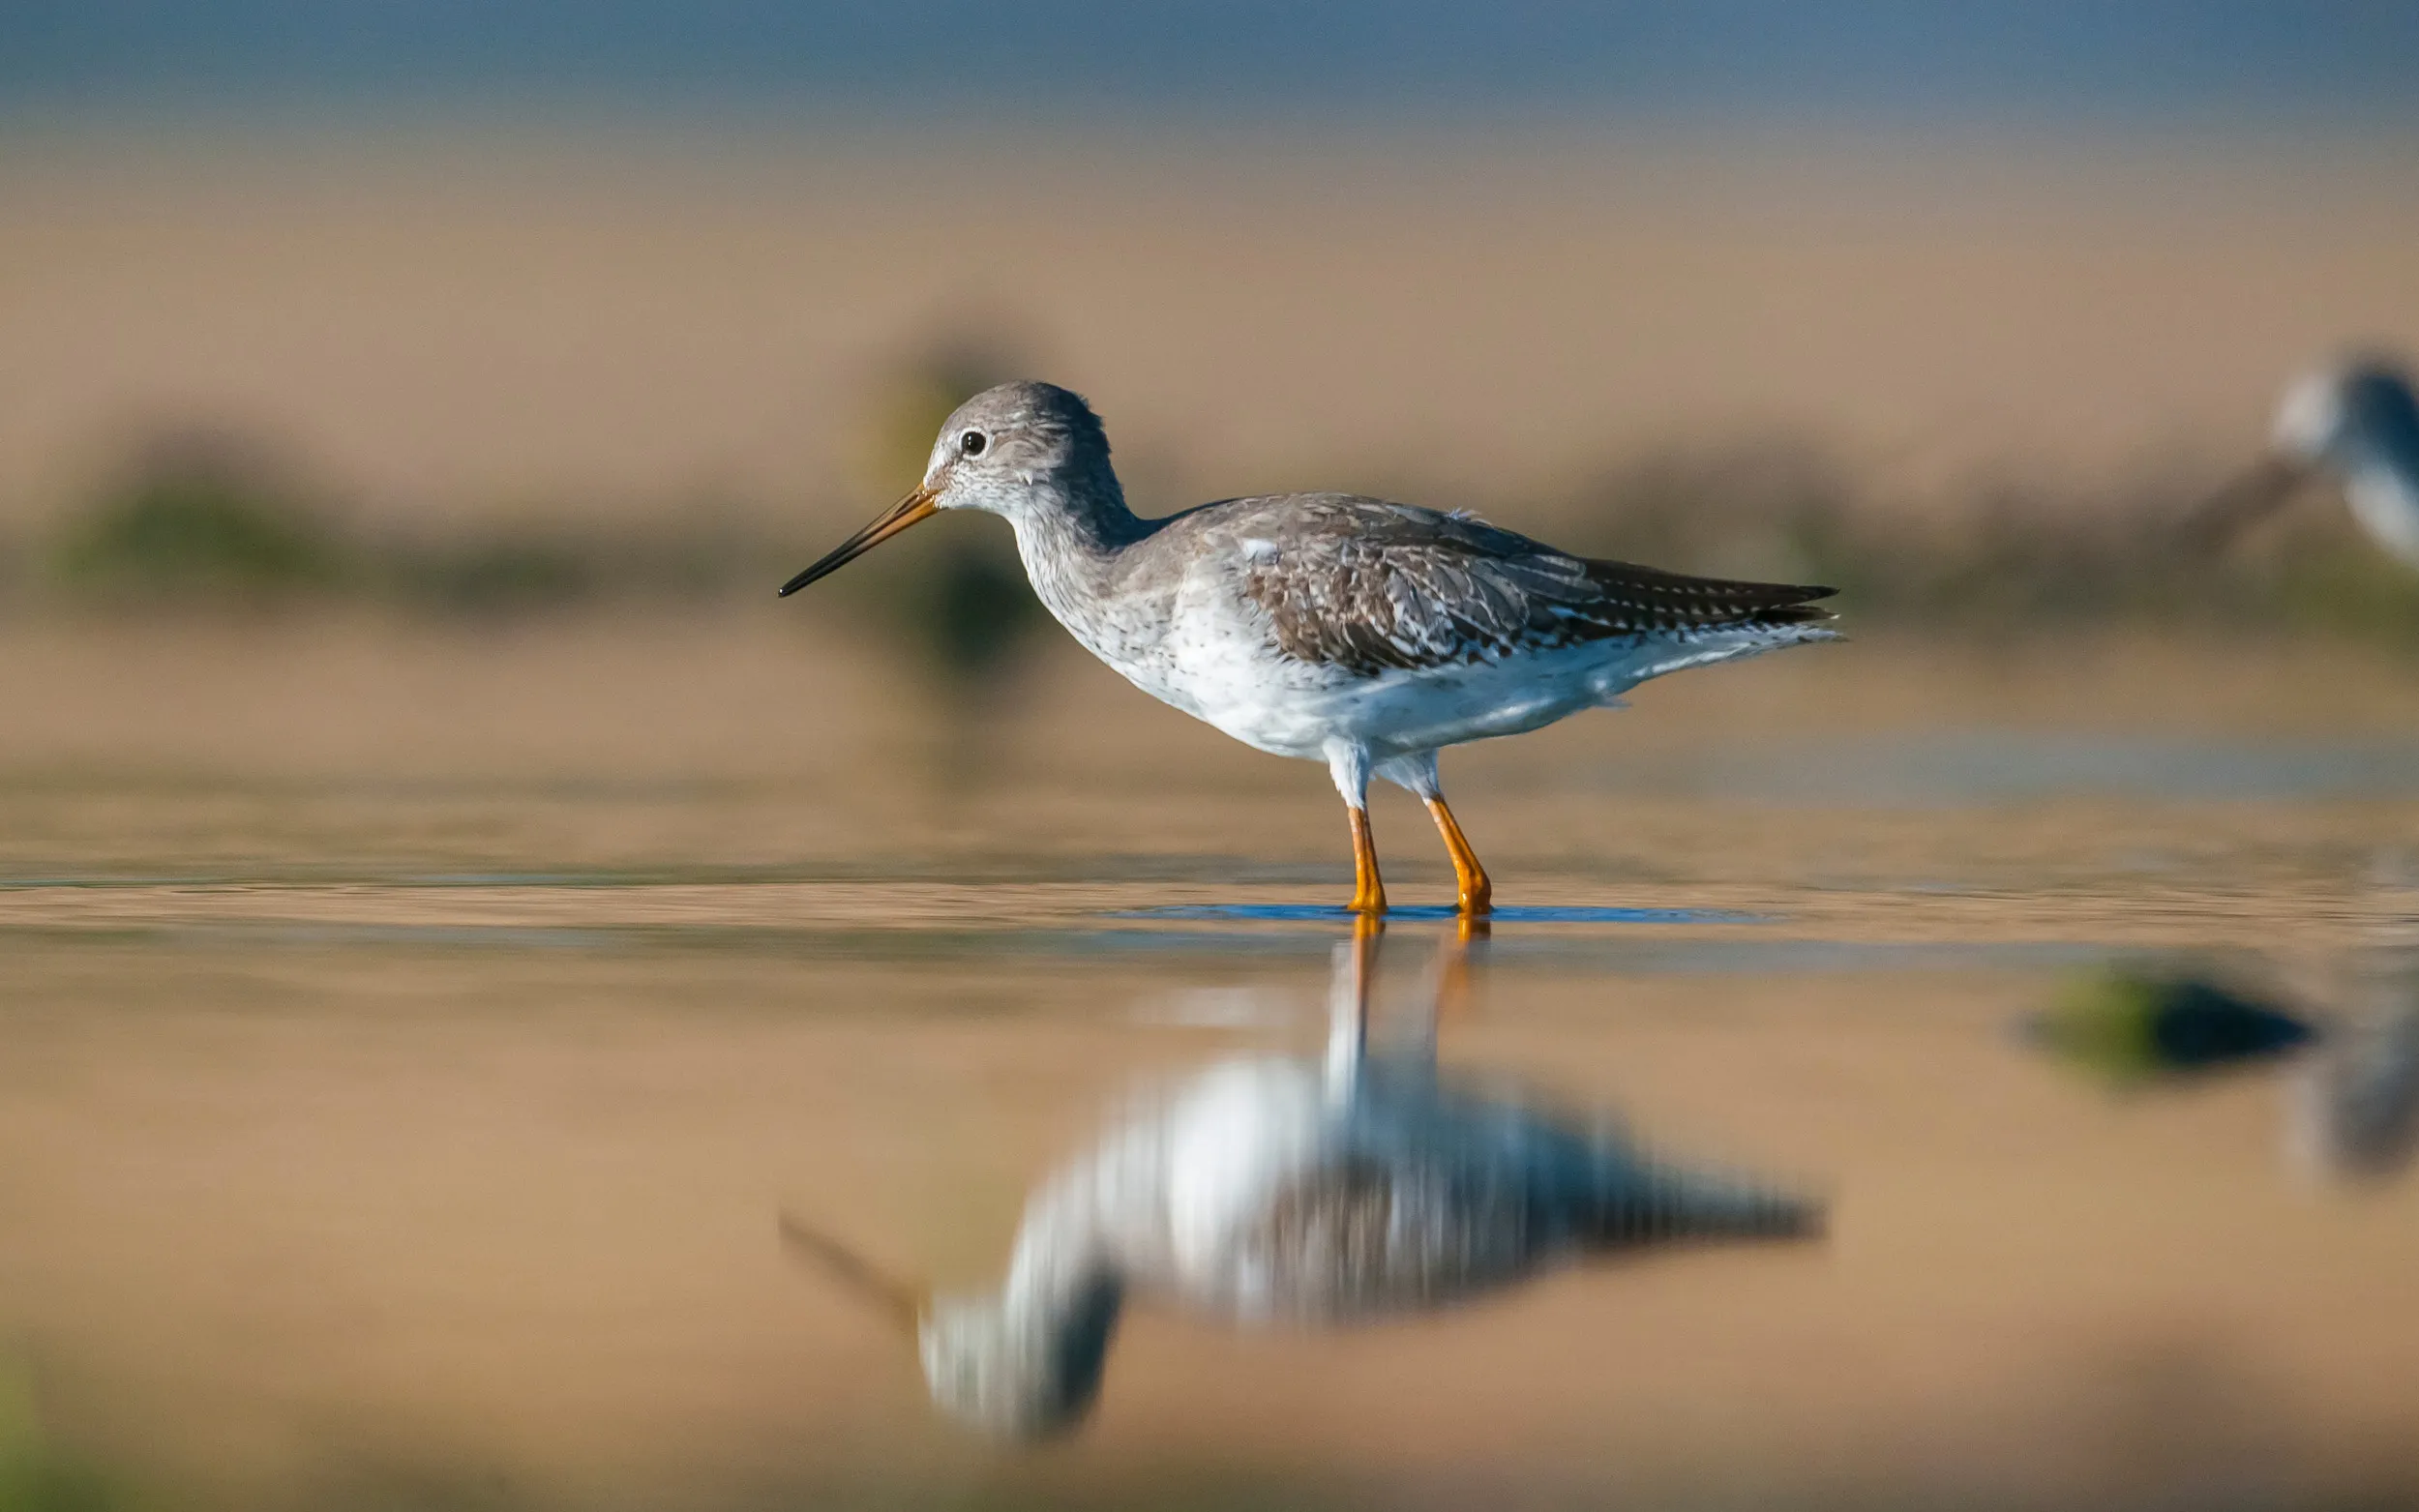 Common Redshank in winter plumage stood in shallow water.